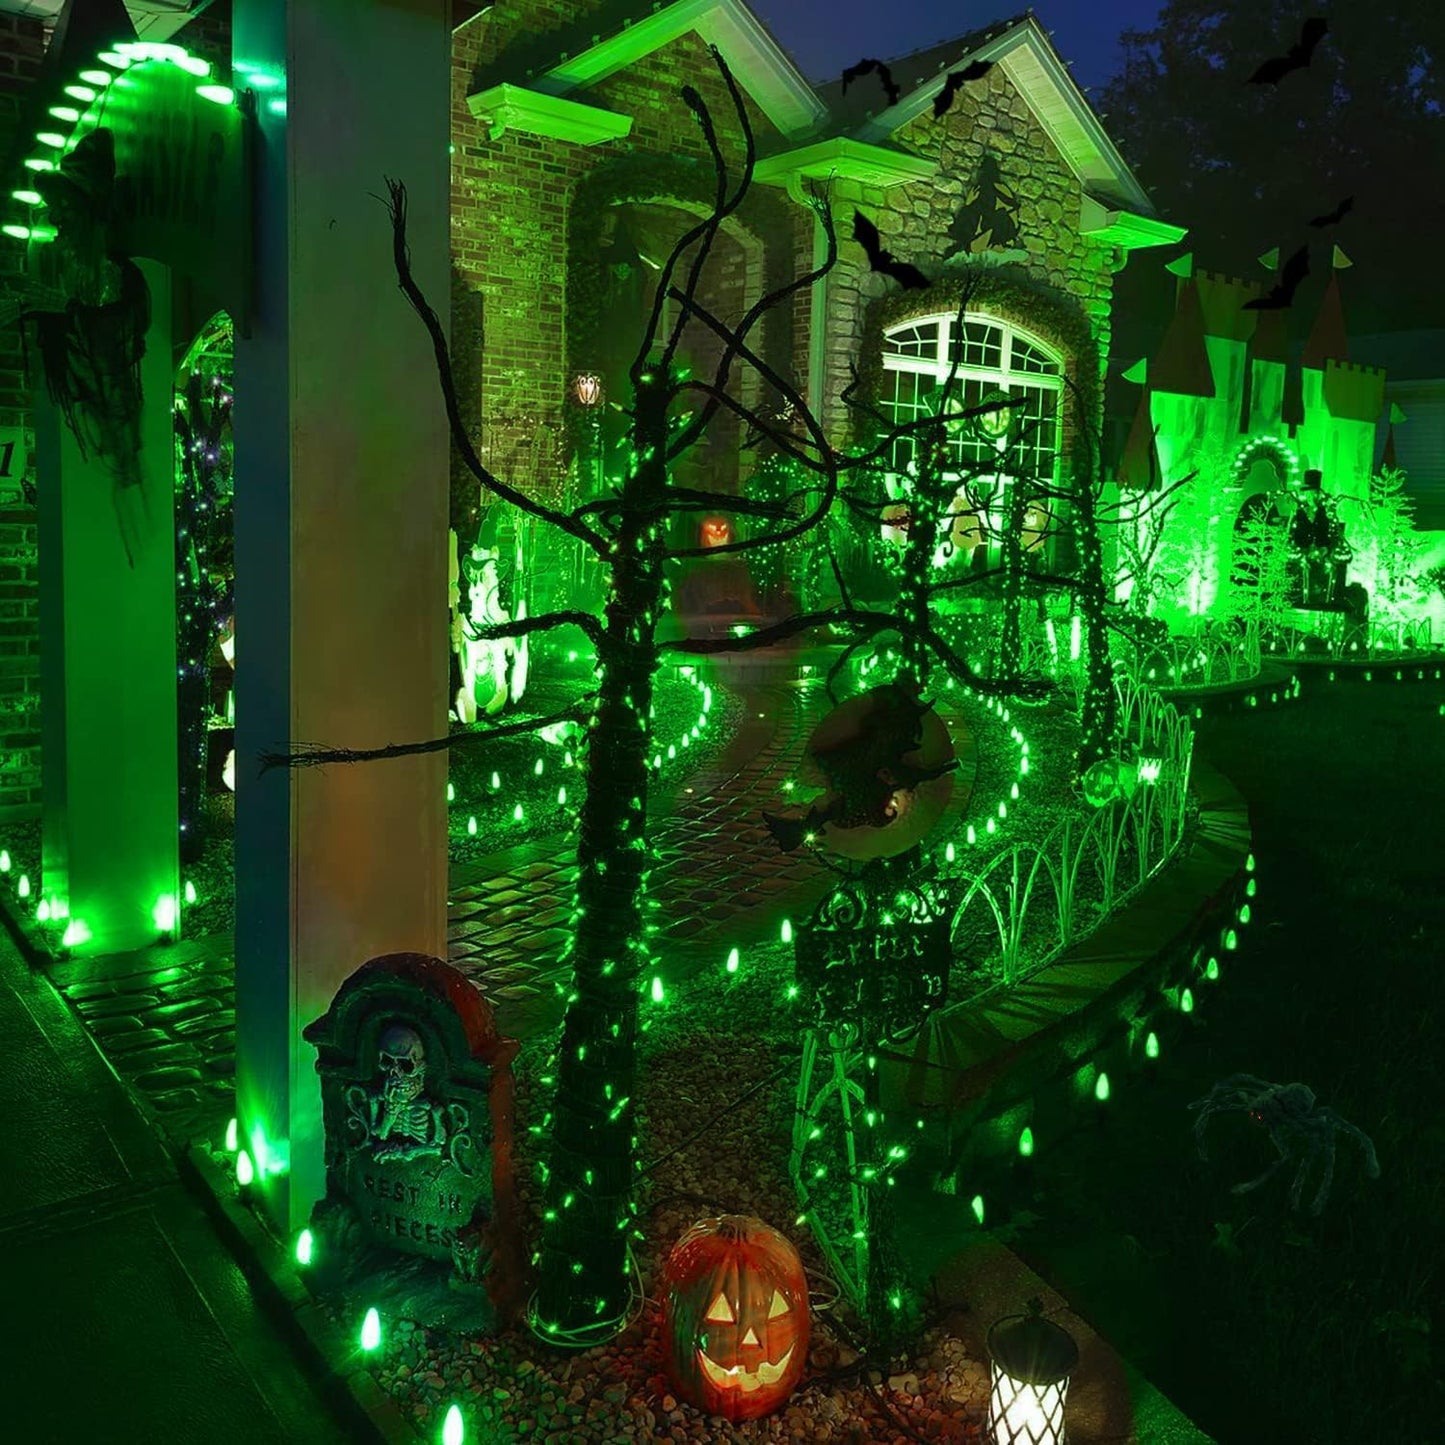 Halloween-themed house with glowing green lights.